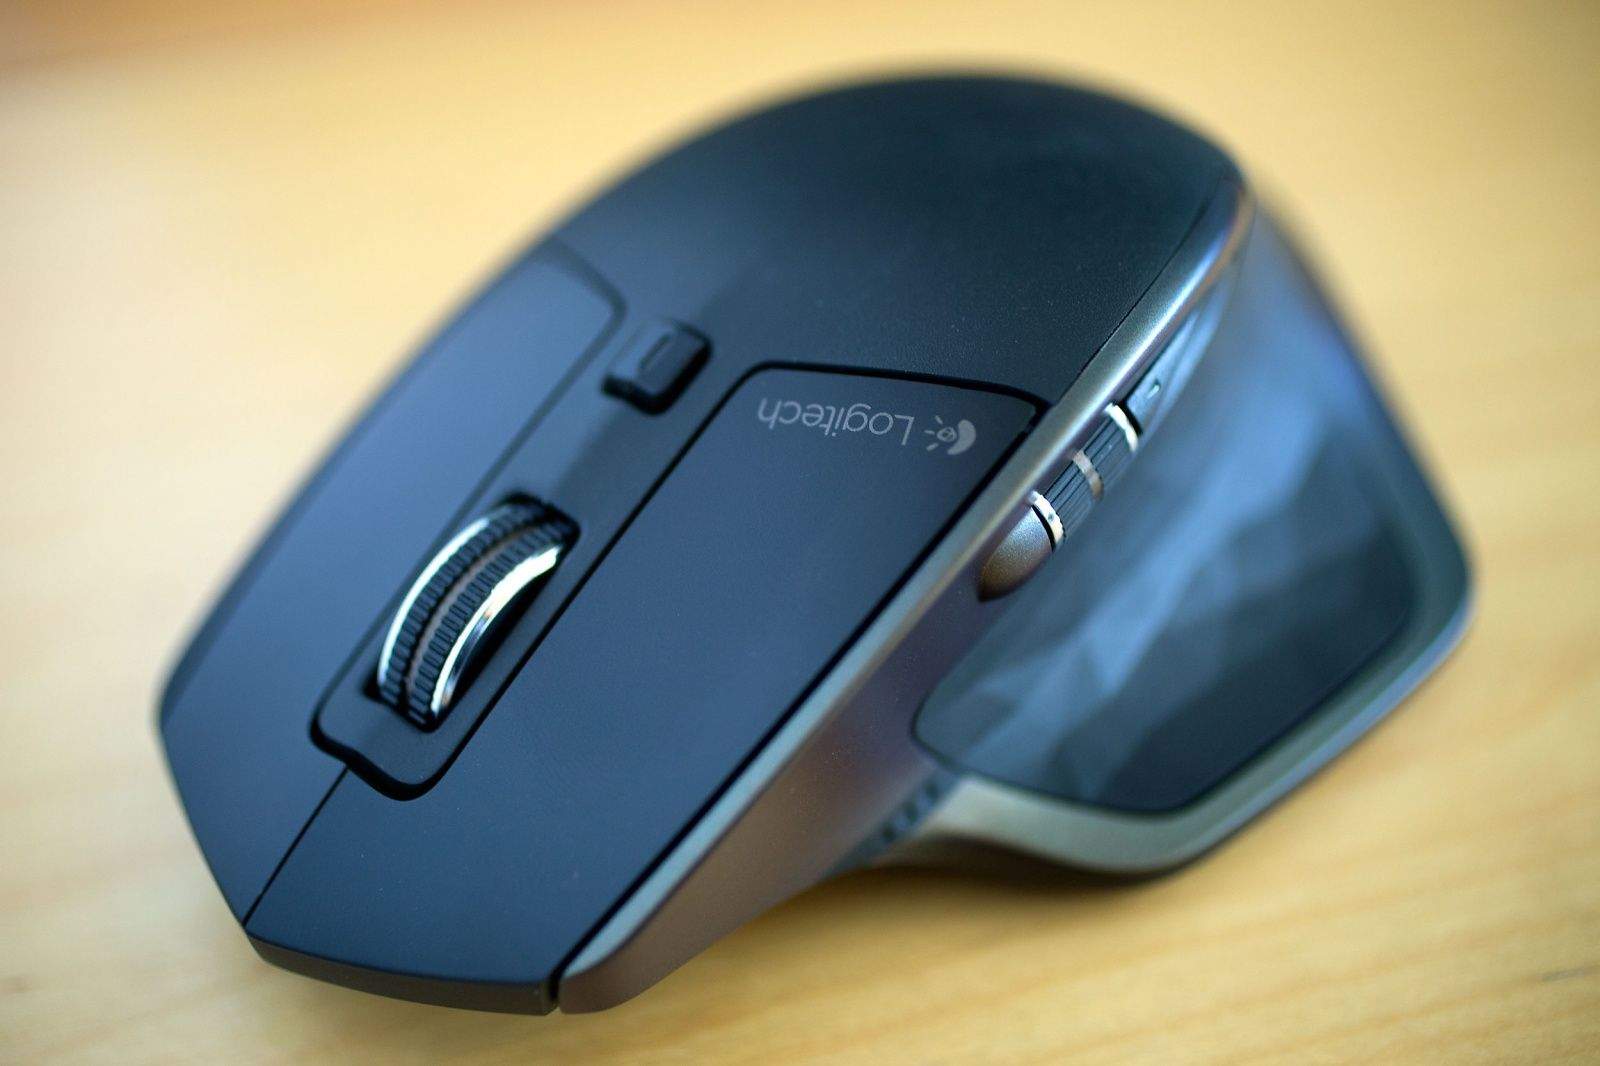 The top of the Logitech MX Master mouse.